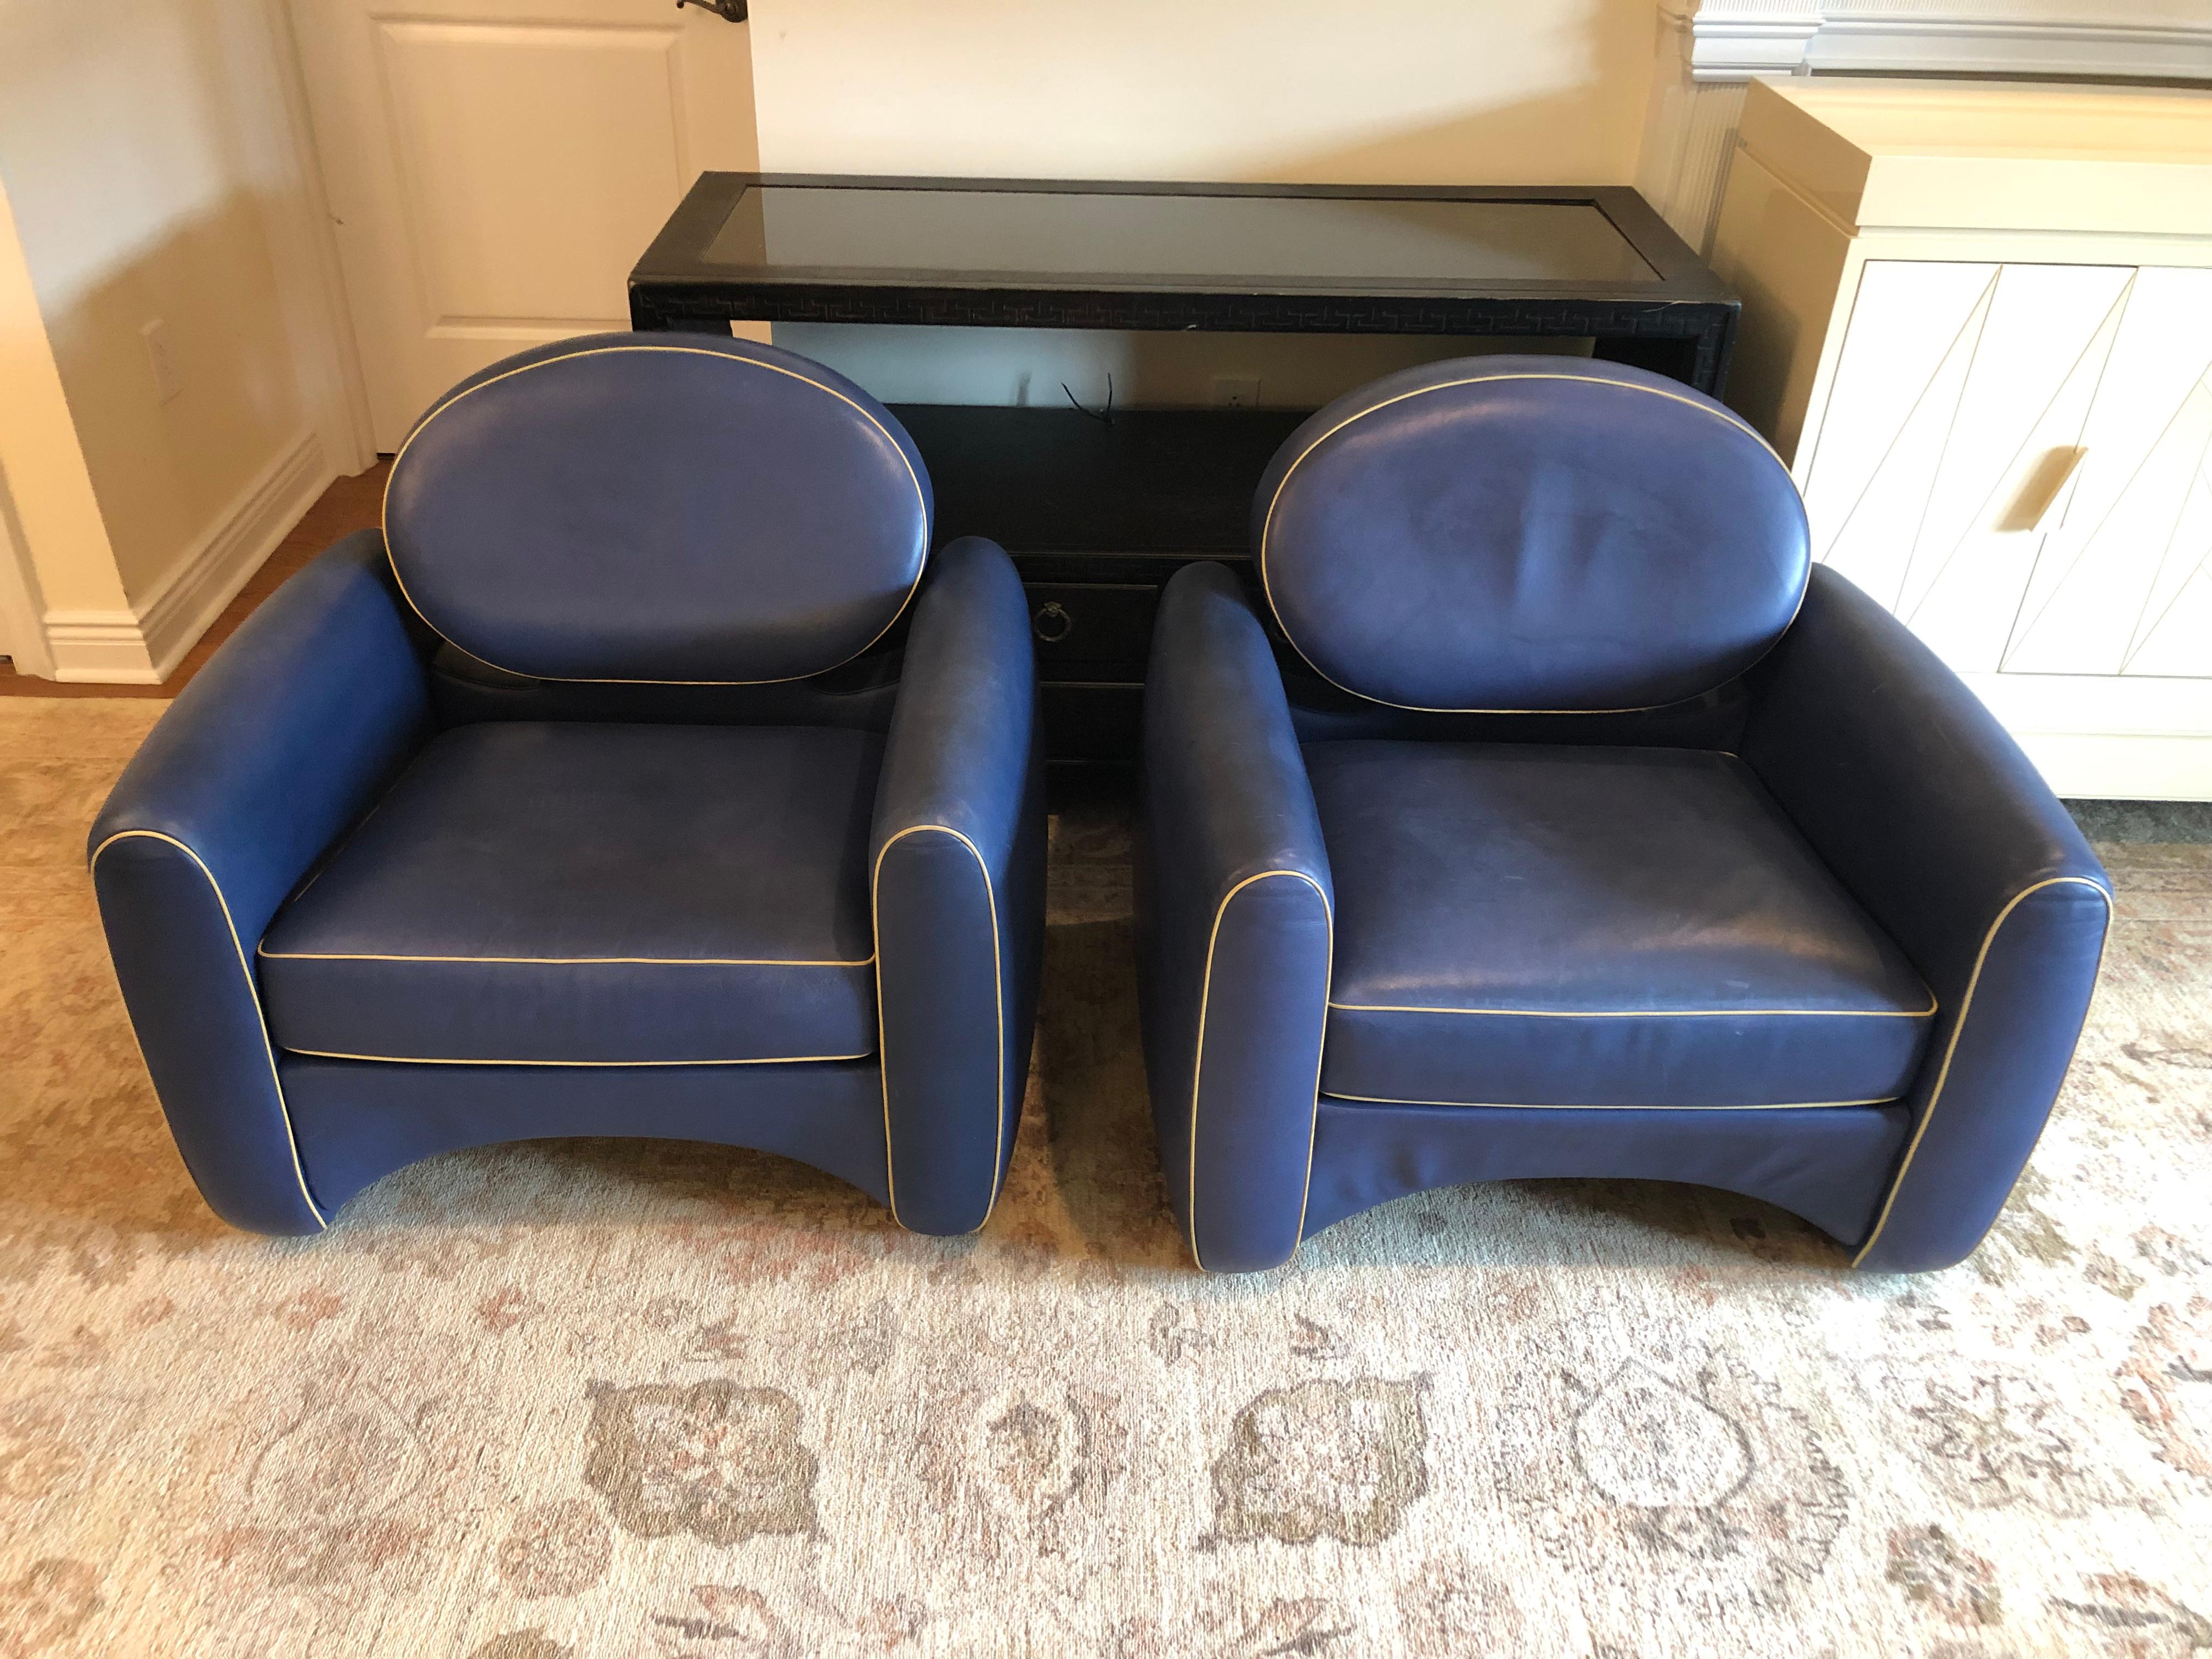 Iconic Mid-Century Modern leather Osaka club chairs for De Sede designed by very collectible Belgian artist, Emiel Veranneman. The fabulously shaped chairs are a gorgeous shade of blue leather with tan piping.

Measures: Seat depth (front to back)